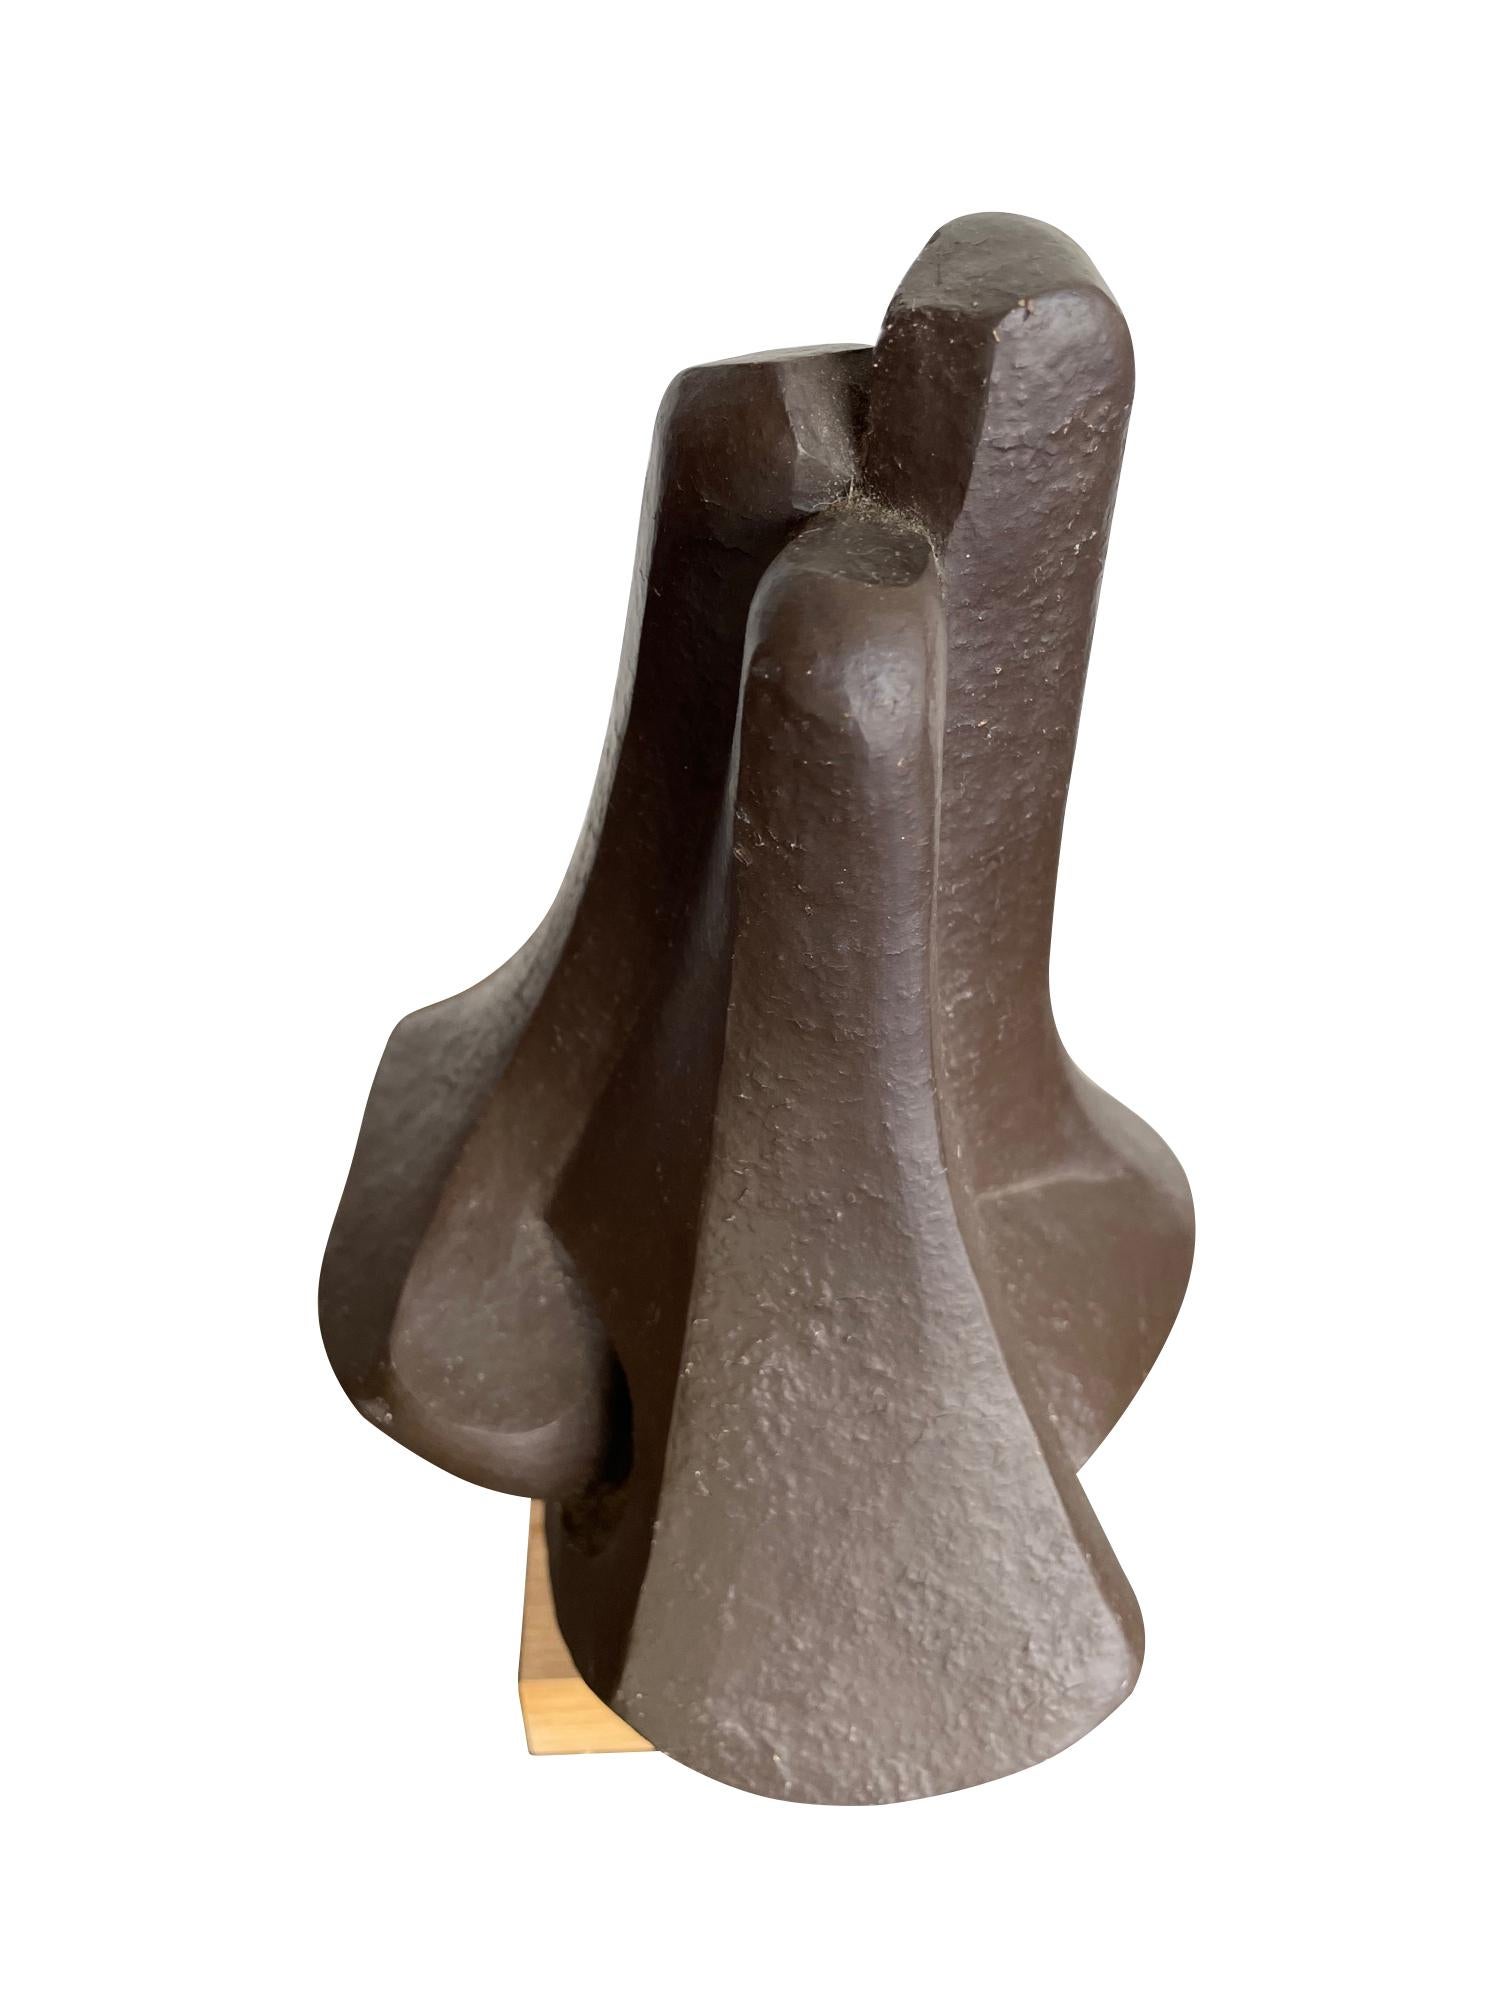 Mid-20th Century 1960s Belgian Ceramic Abstract Sculpture with Bronze Textured Style Finish